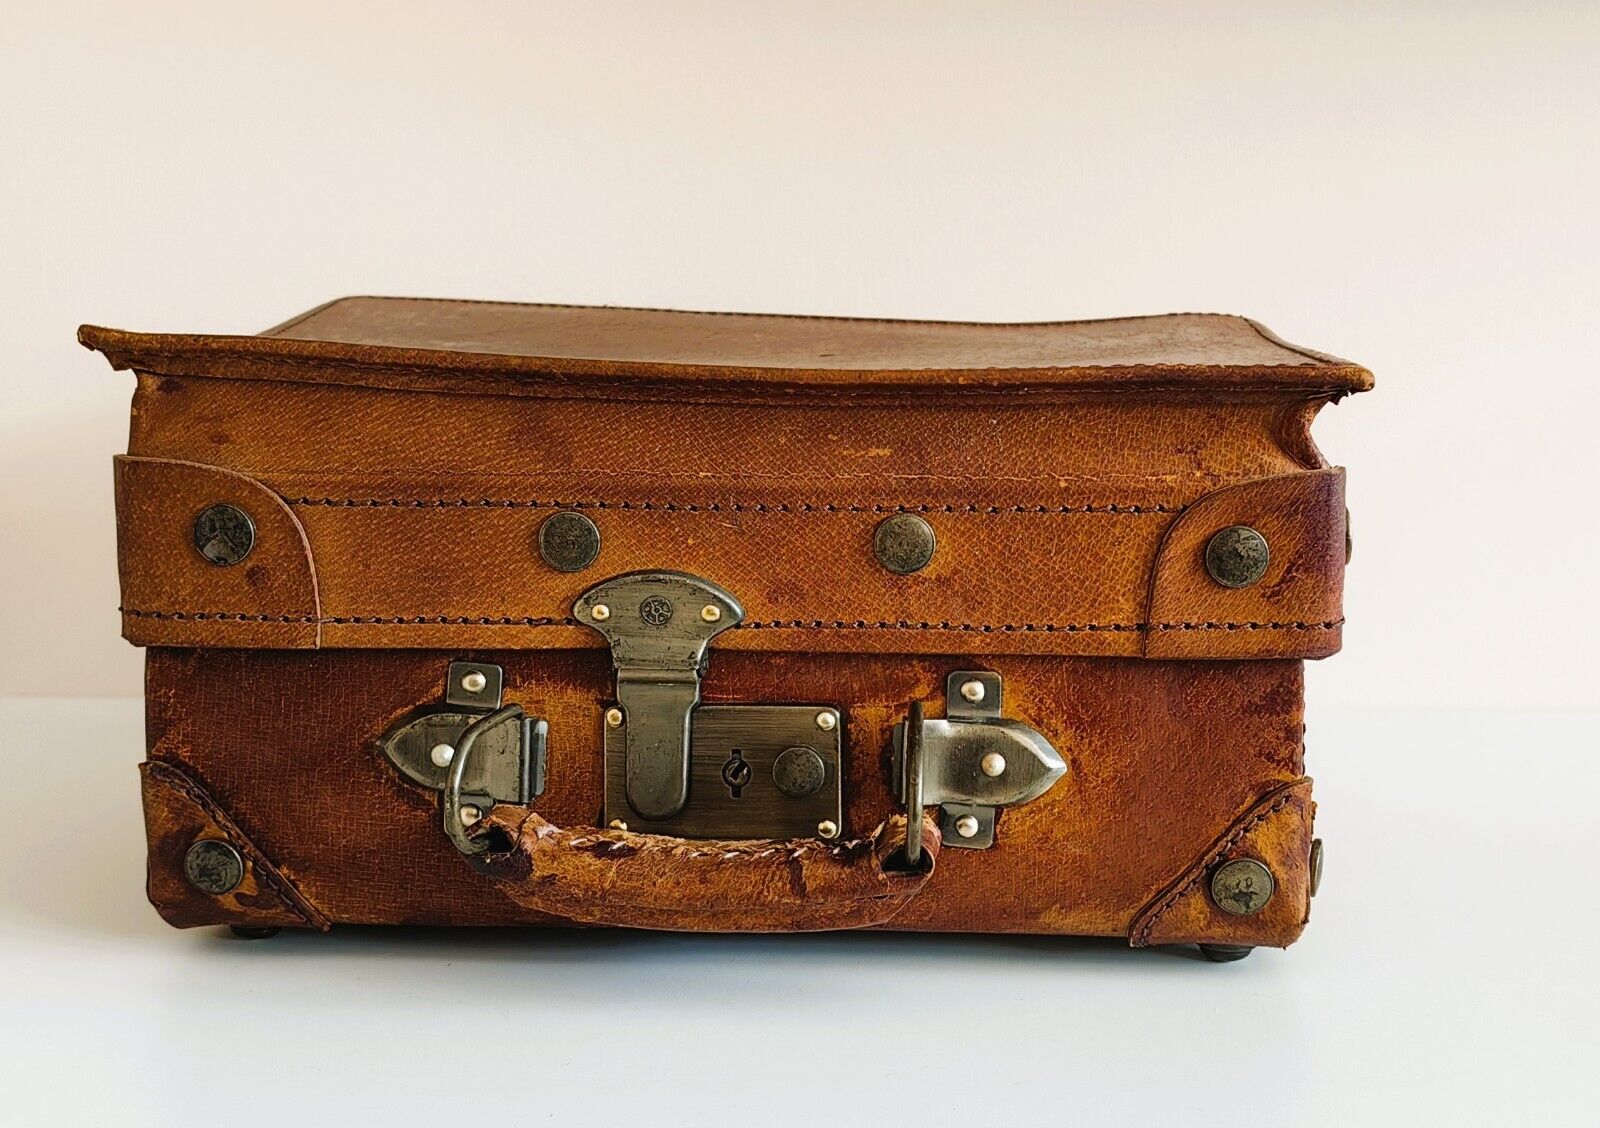 A magnificent early 20th century hard sided genuine leather briefcase, VERY RARE